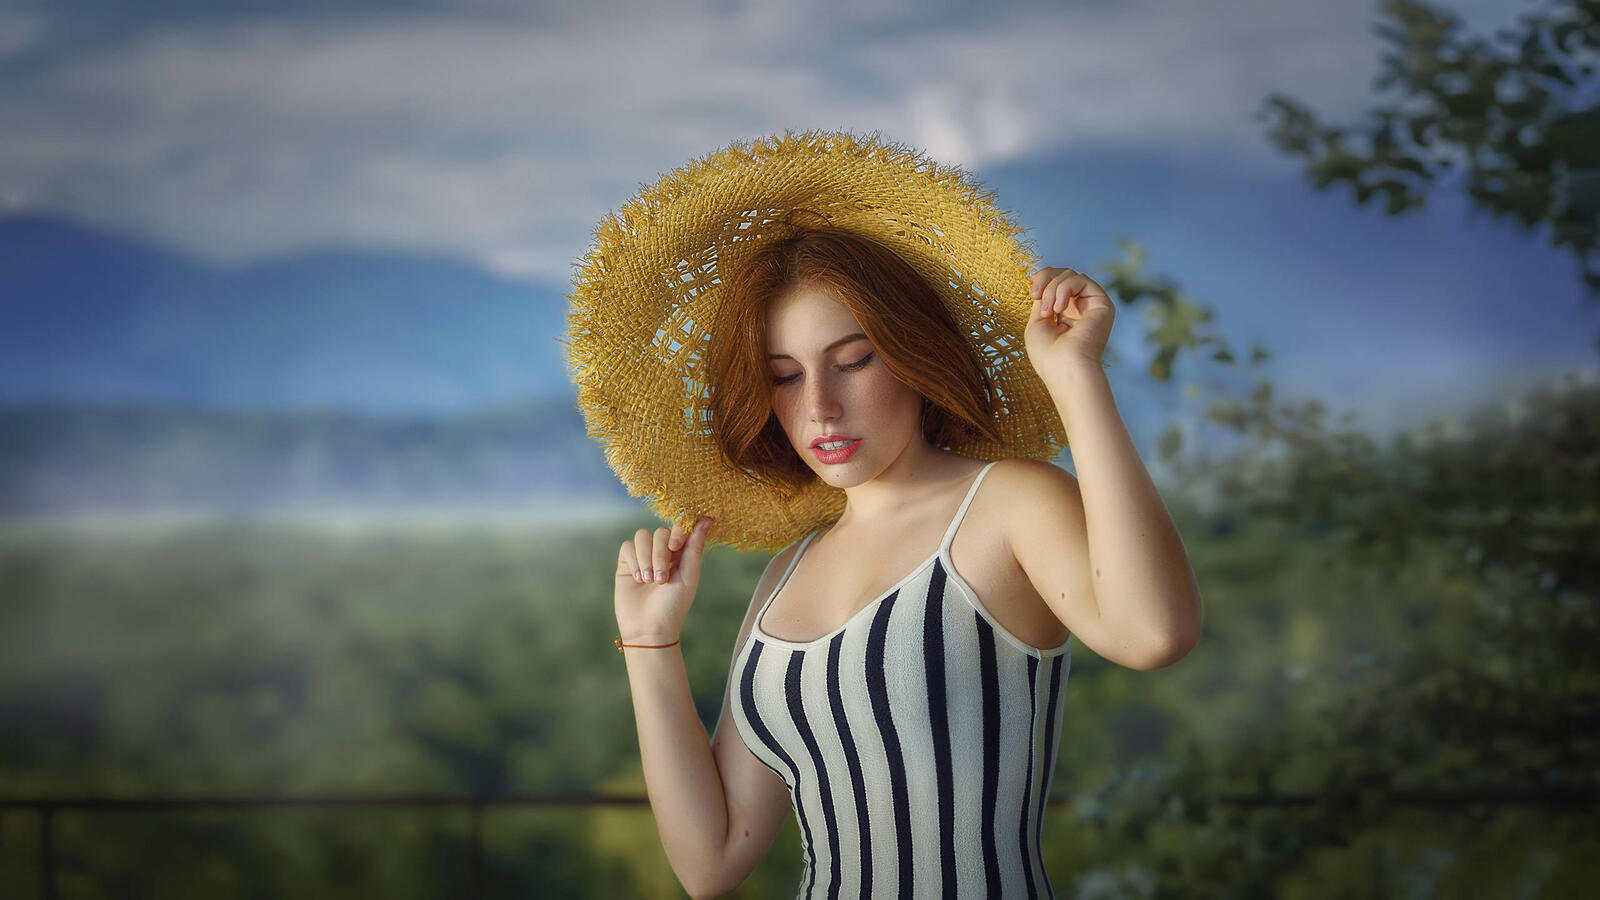 Free photo A redhead in a hat and a striped swimsuit